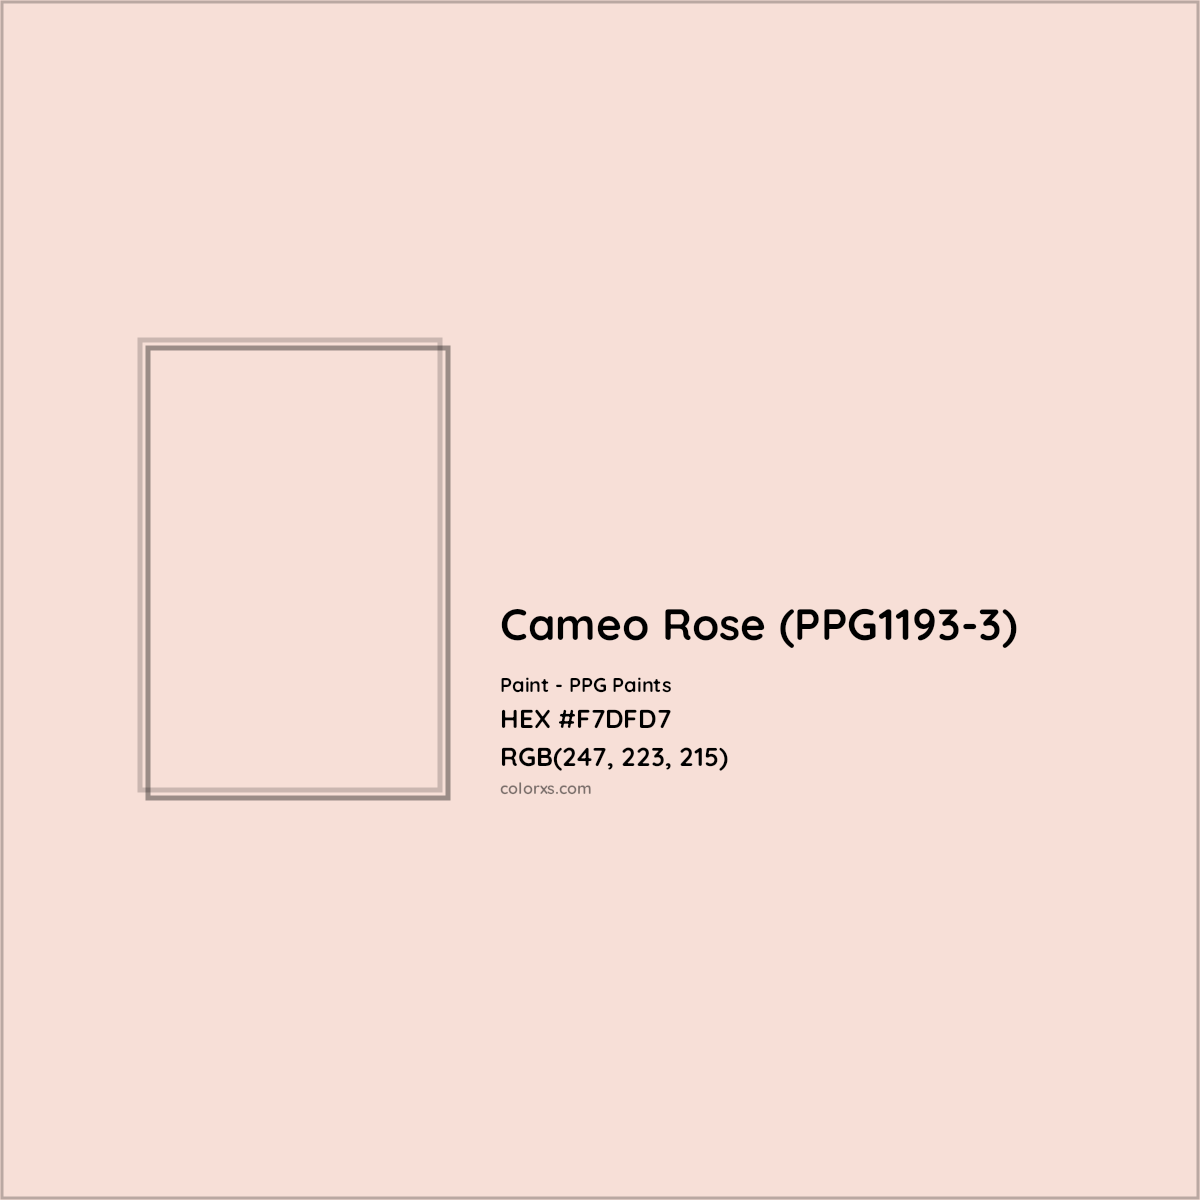 HEX #F7DFD7 Cameo Rose (PPG1193-3) Paint PPG Paints - Color Code